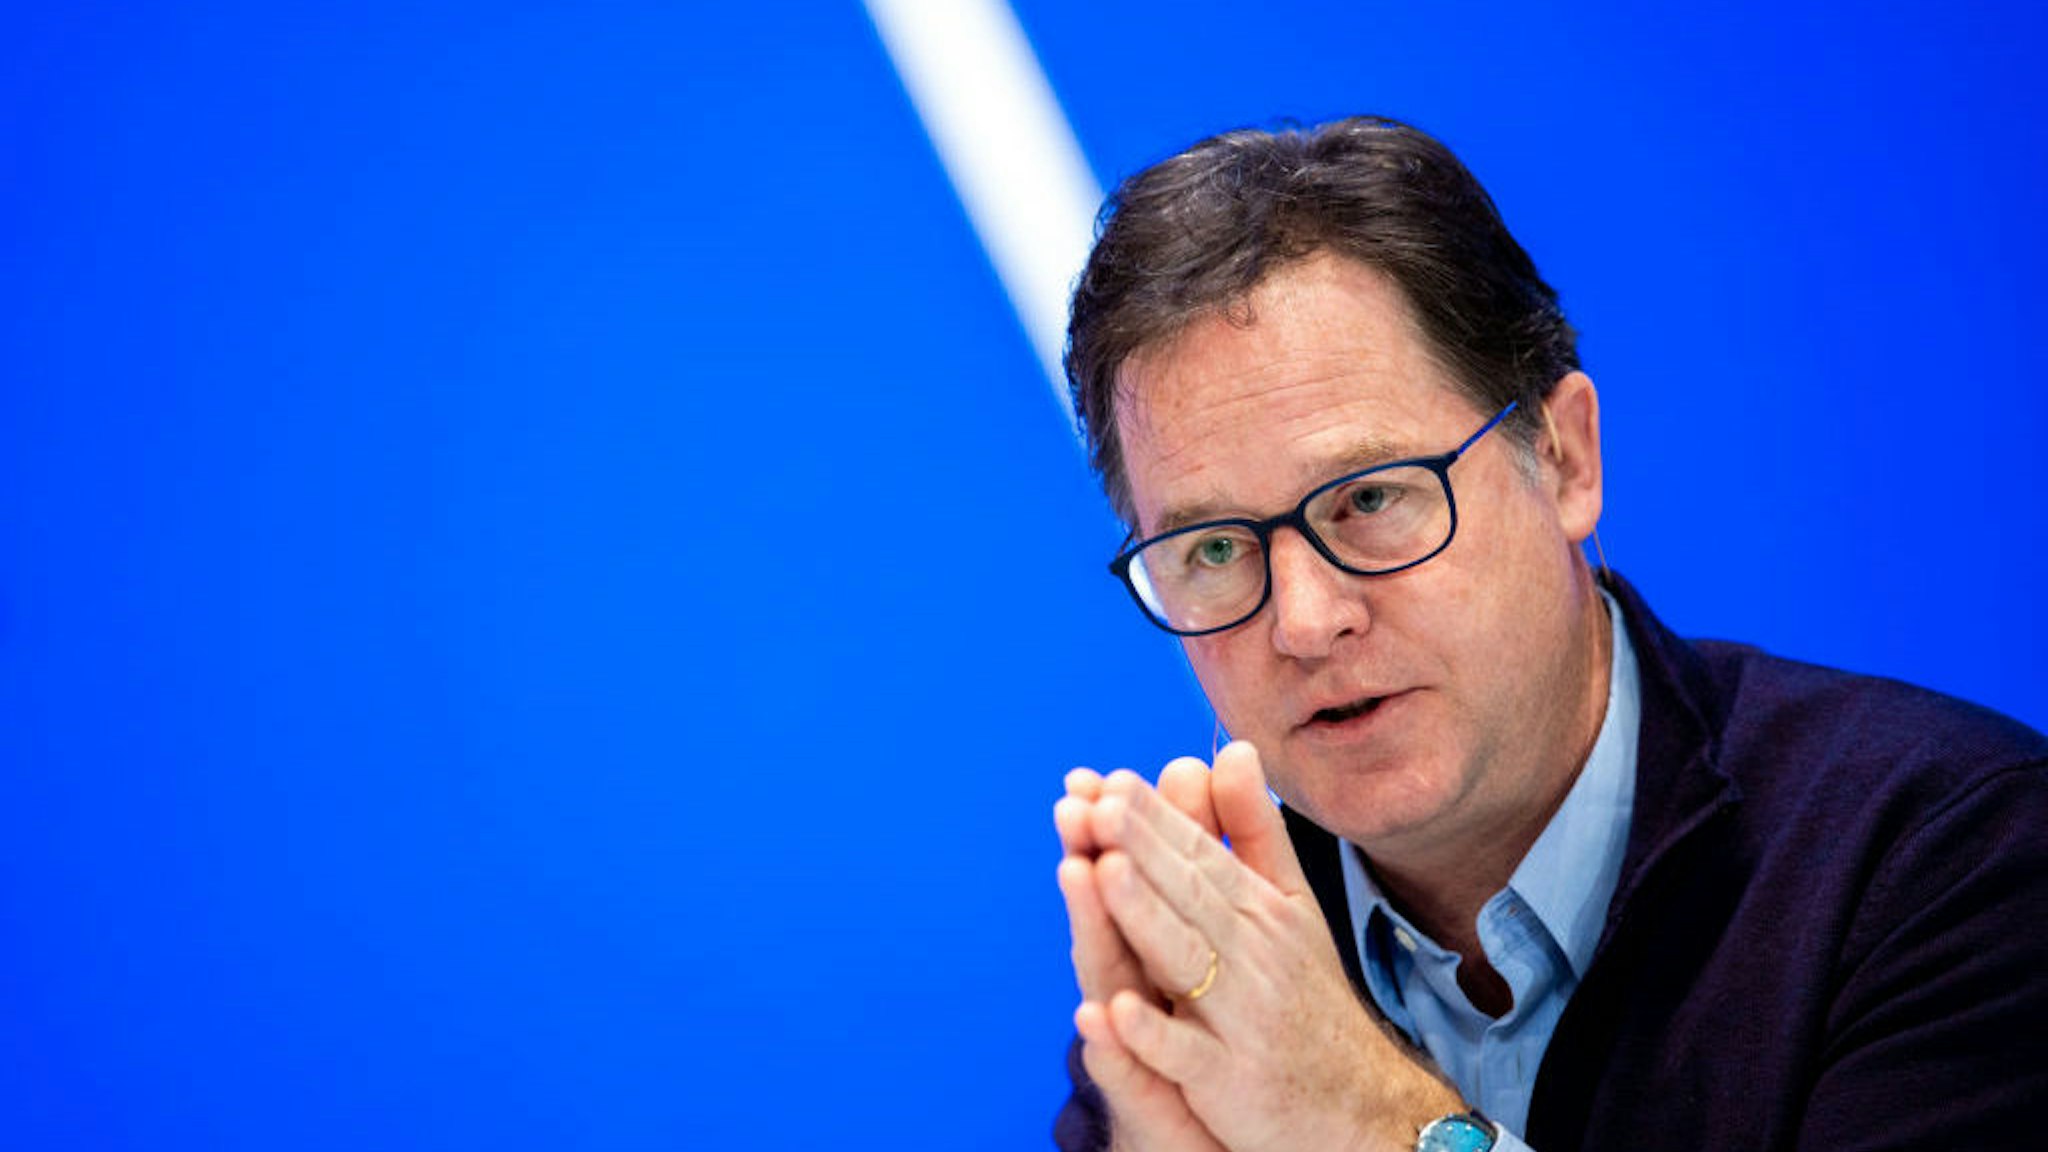 20 January 2020, Bavaria, Munich: Nick Clegg, Head of Policy at Facebook, speaks on stage during the DLD (Digital Life Design) innovation conference. Clegg has defended the decision to stick to advertising with political content, unlike Twitter and Google. Photo: Lino Mirgeler/dpa (Photo by Lino Mirgeler/picture alliance via Getty Images)